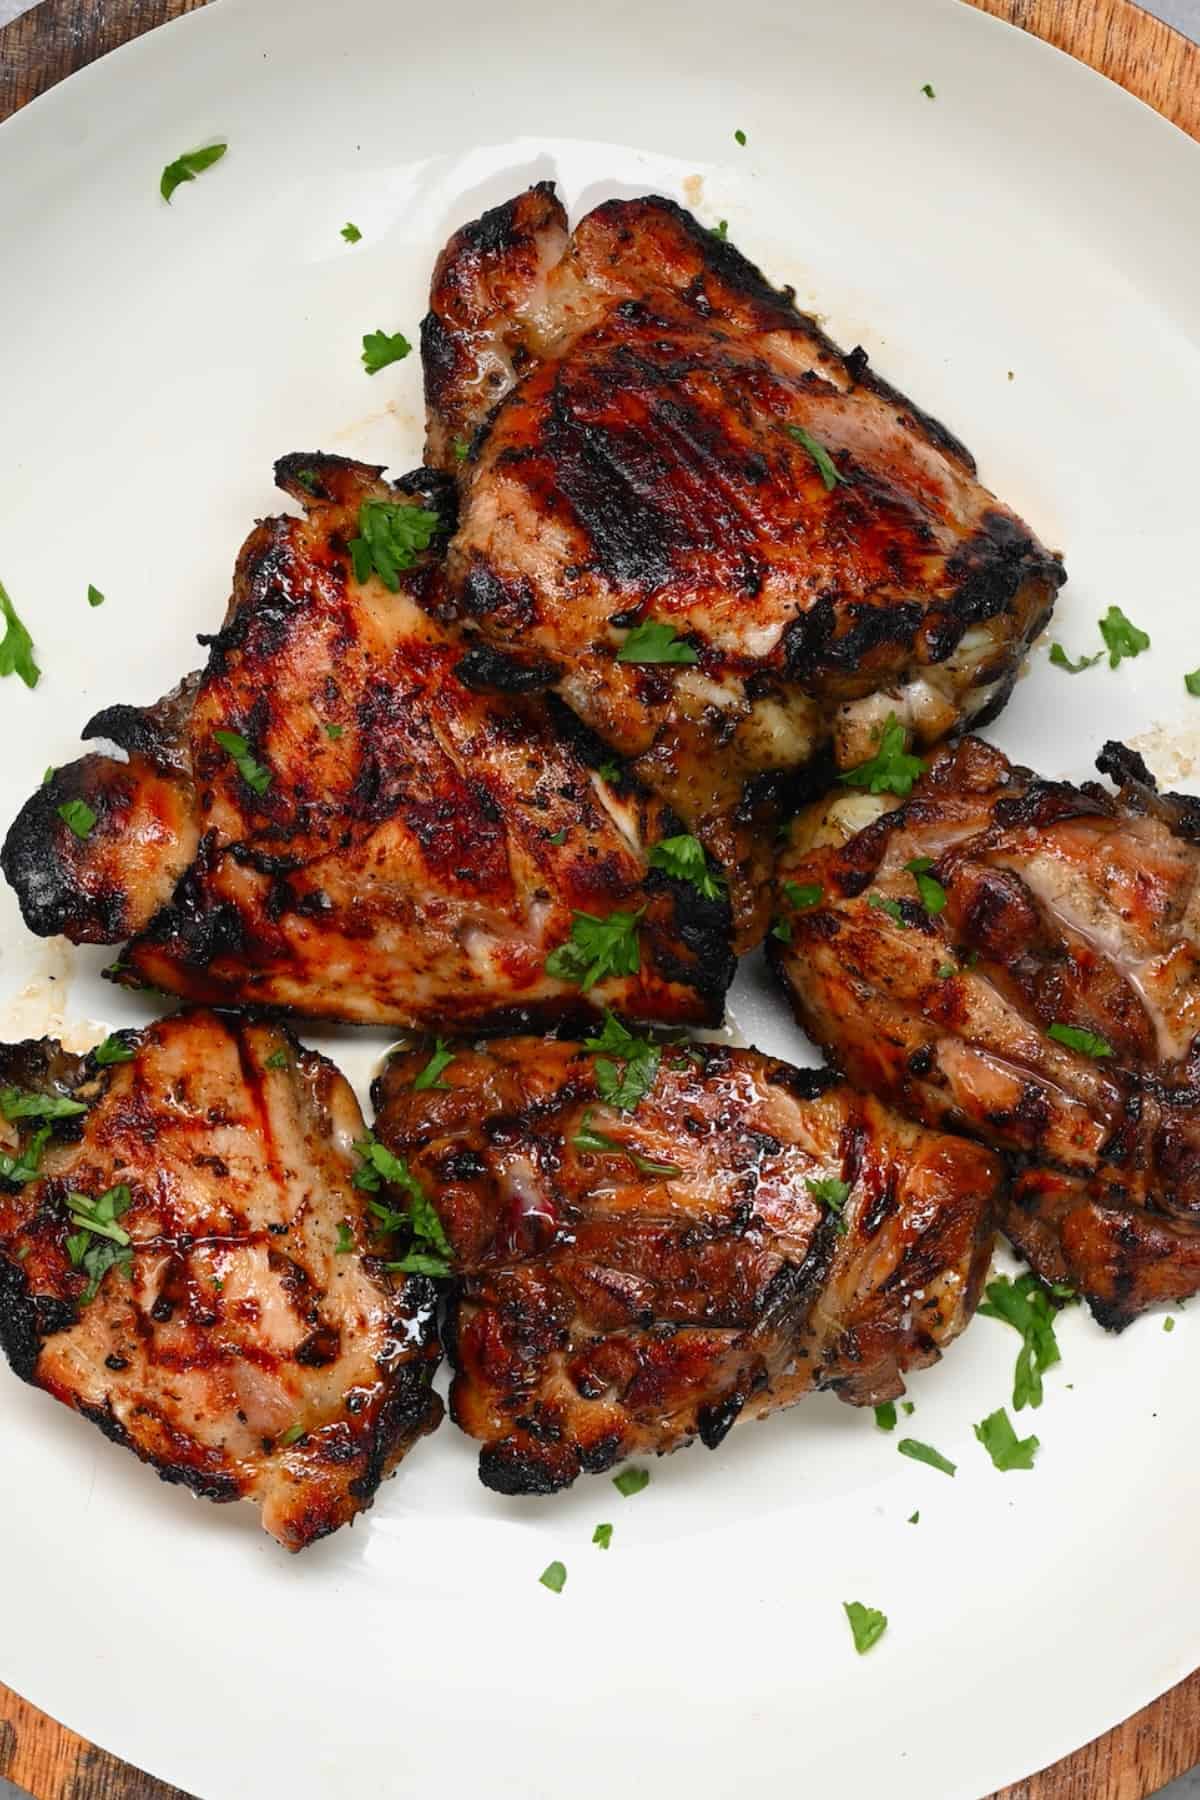 Grilled chicken thighs with skin on in a plate